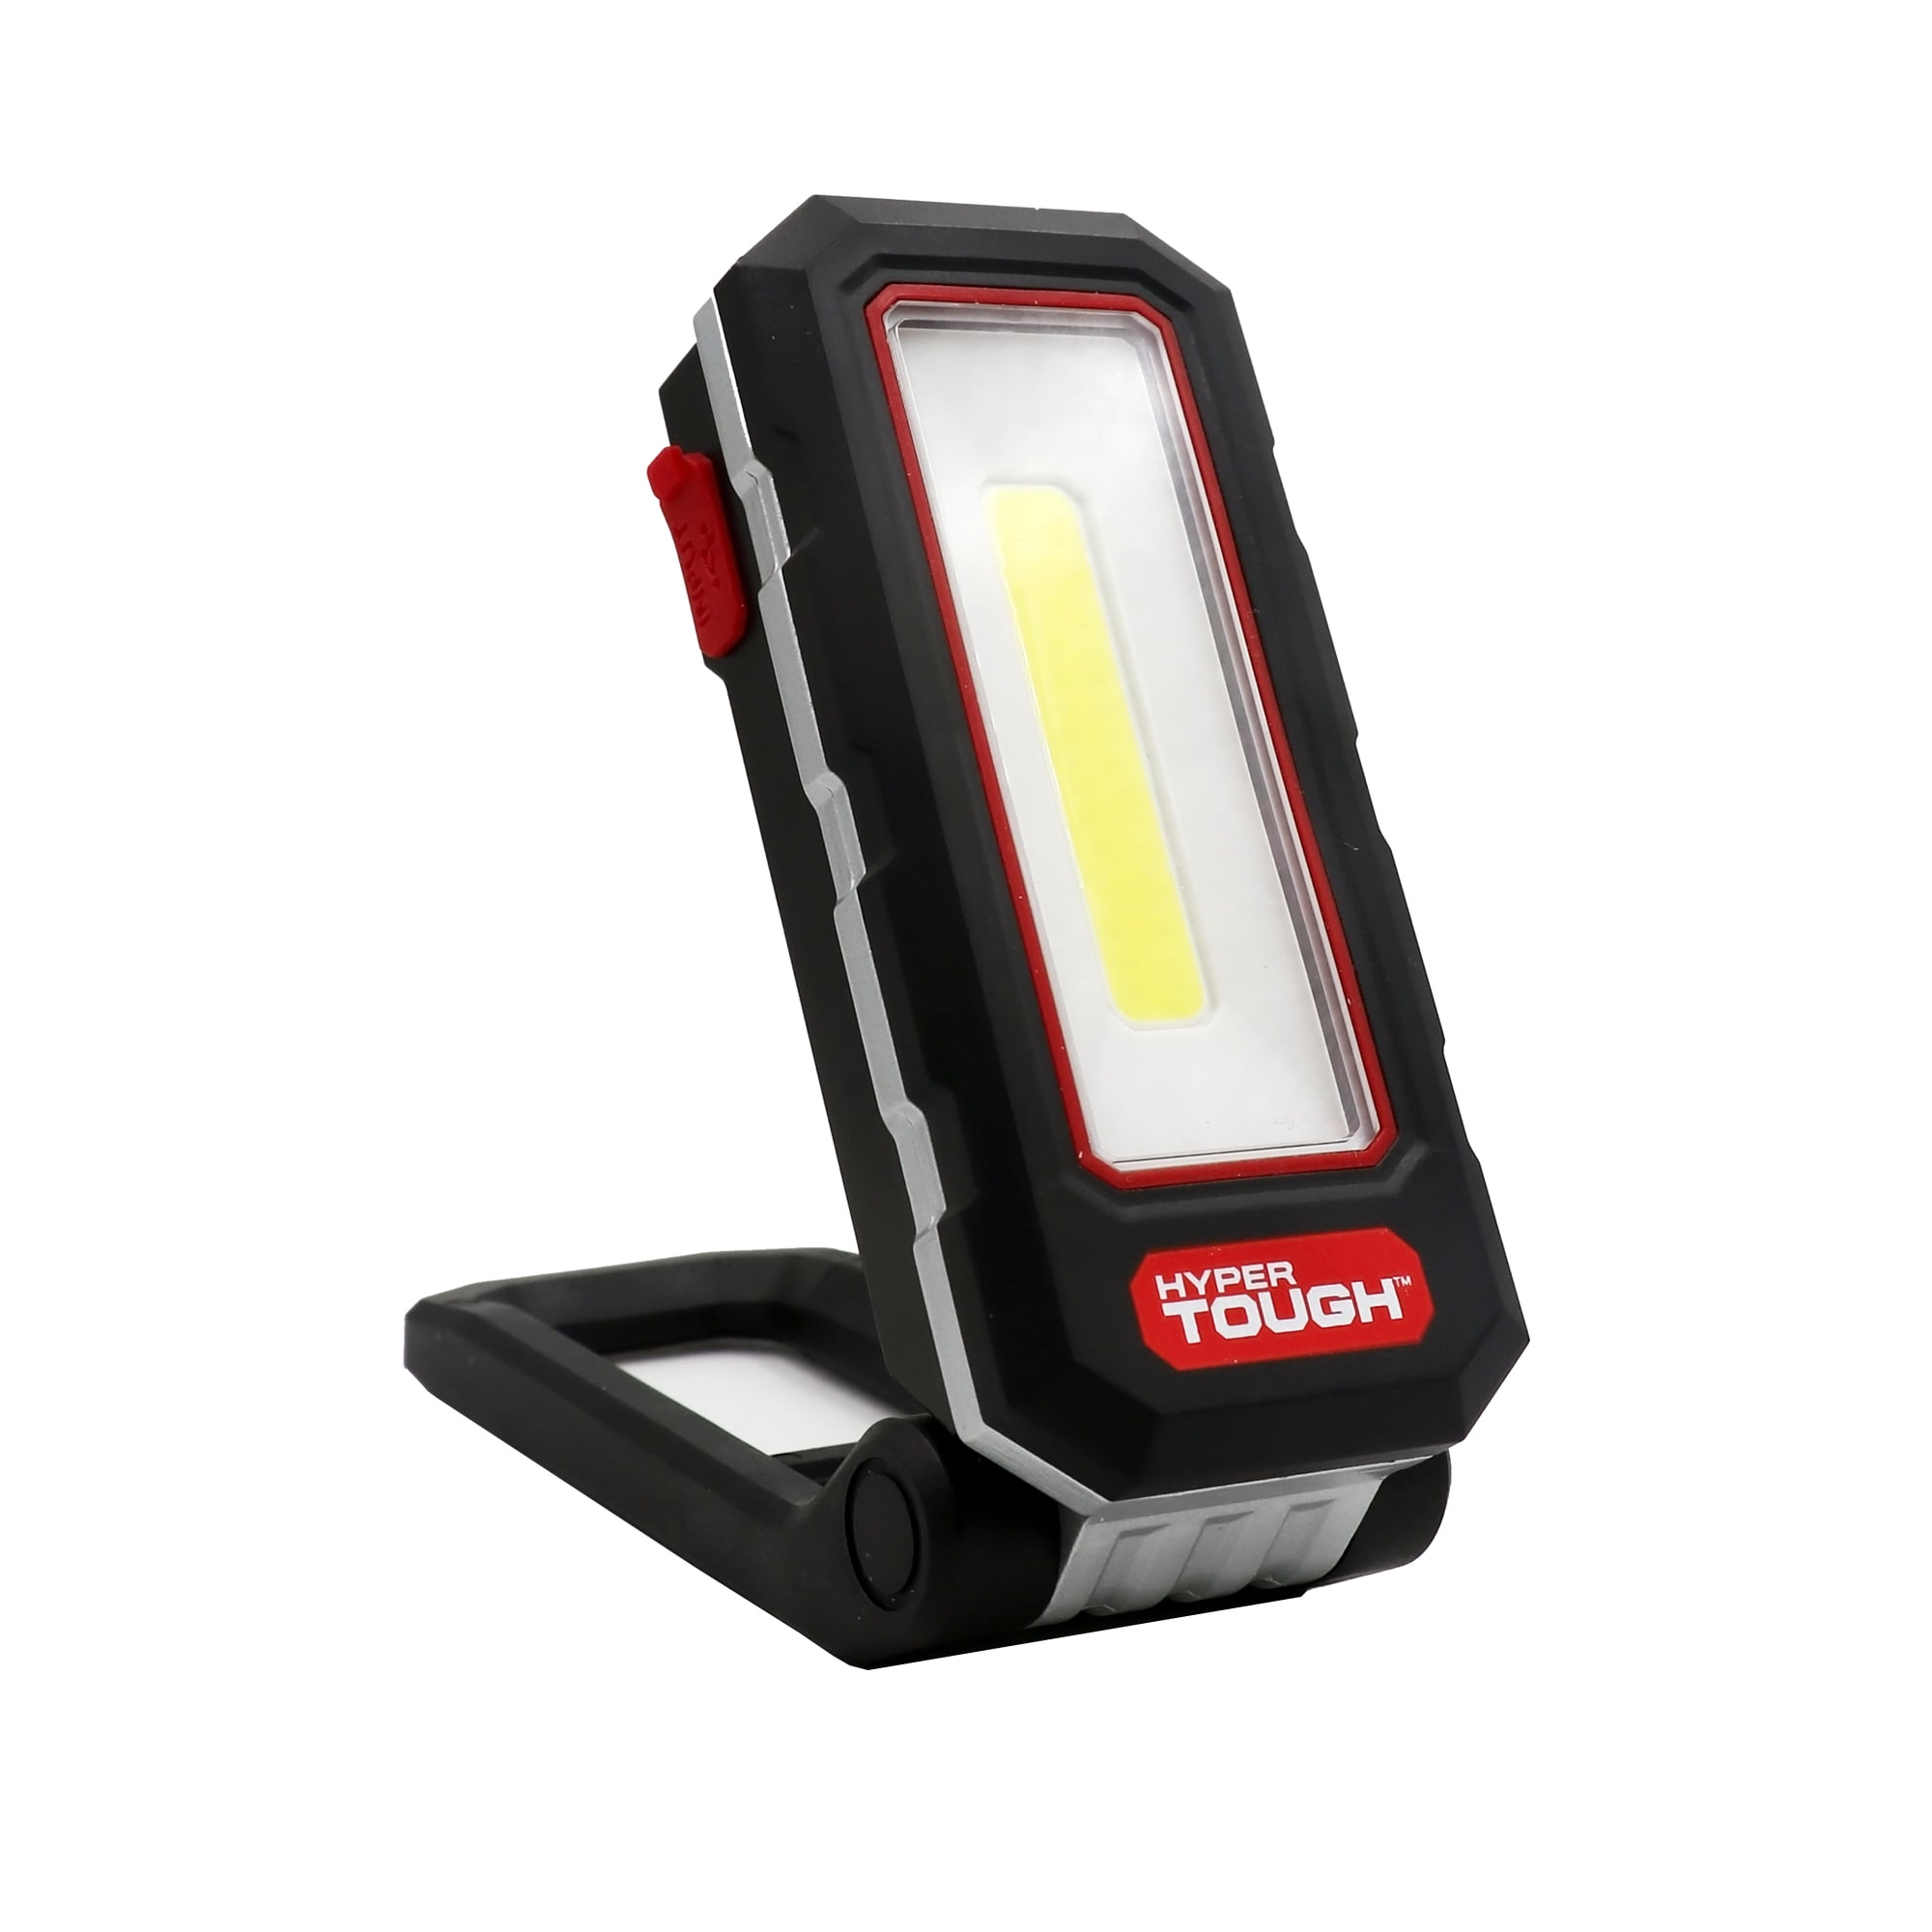 UK STOCK Powerful Compact 36 Lithium-Ion Rechargeable LED Work Light 